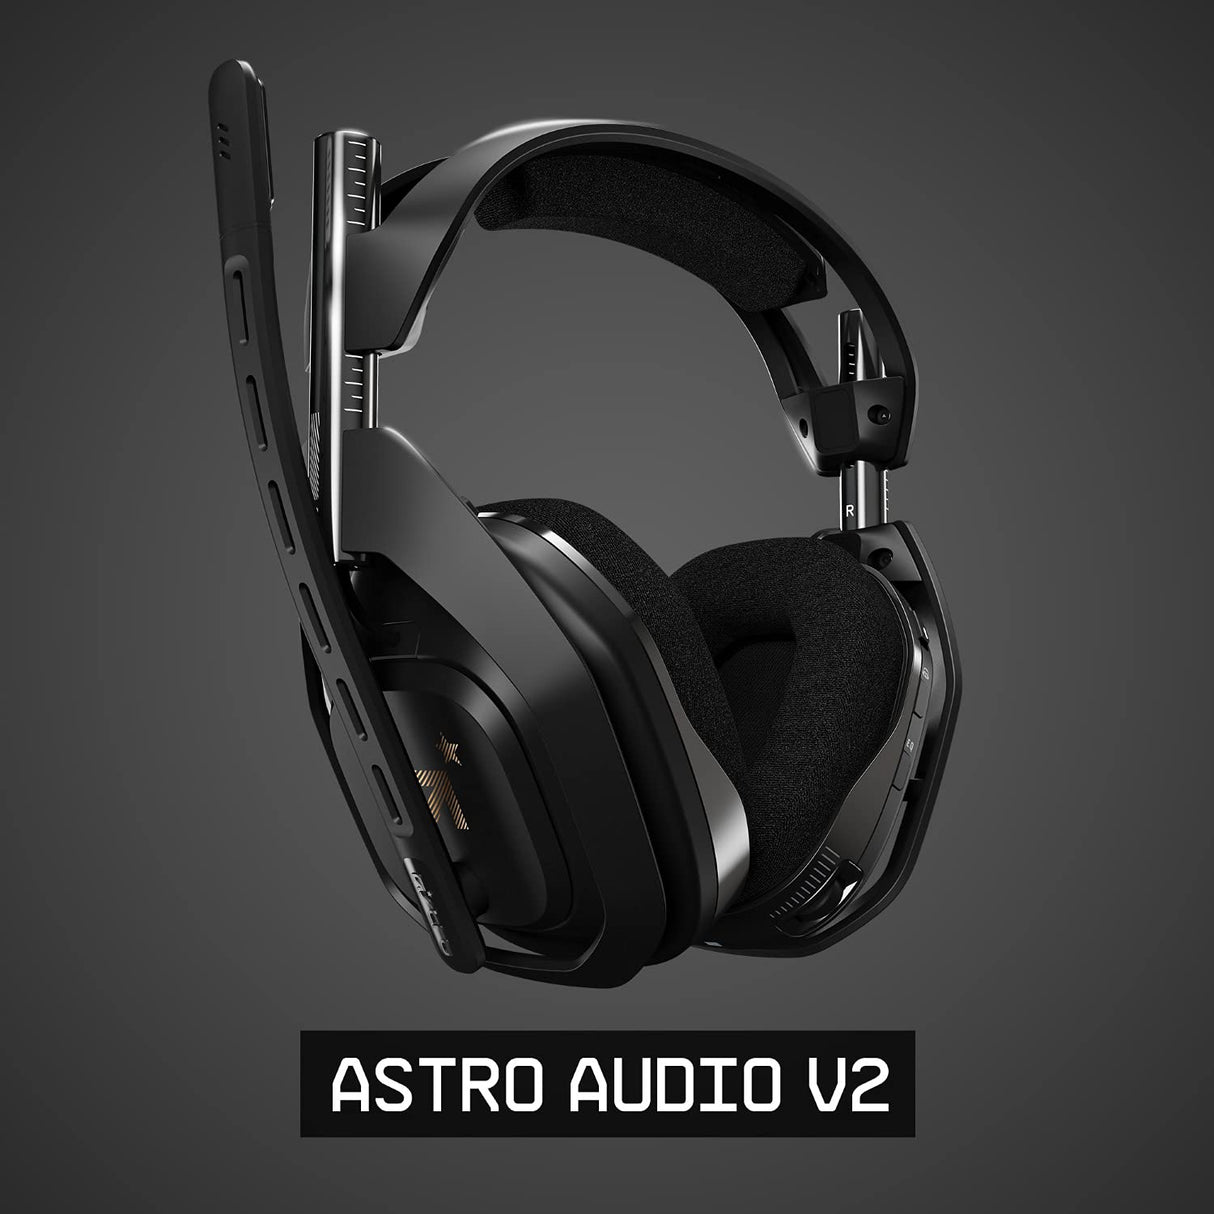 Is this compatible with astro a40 gen 2? : r/AstroGaming